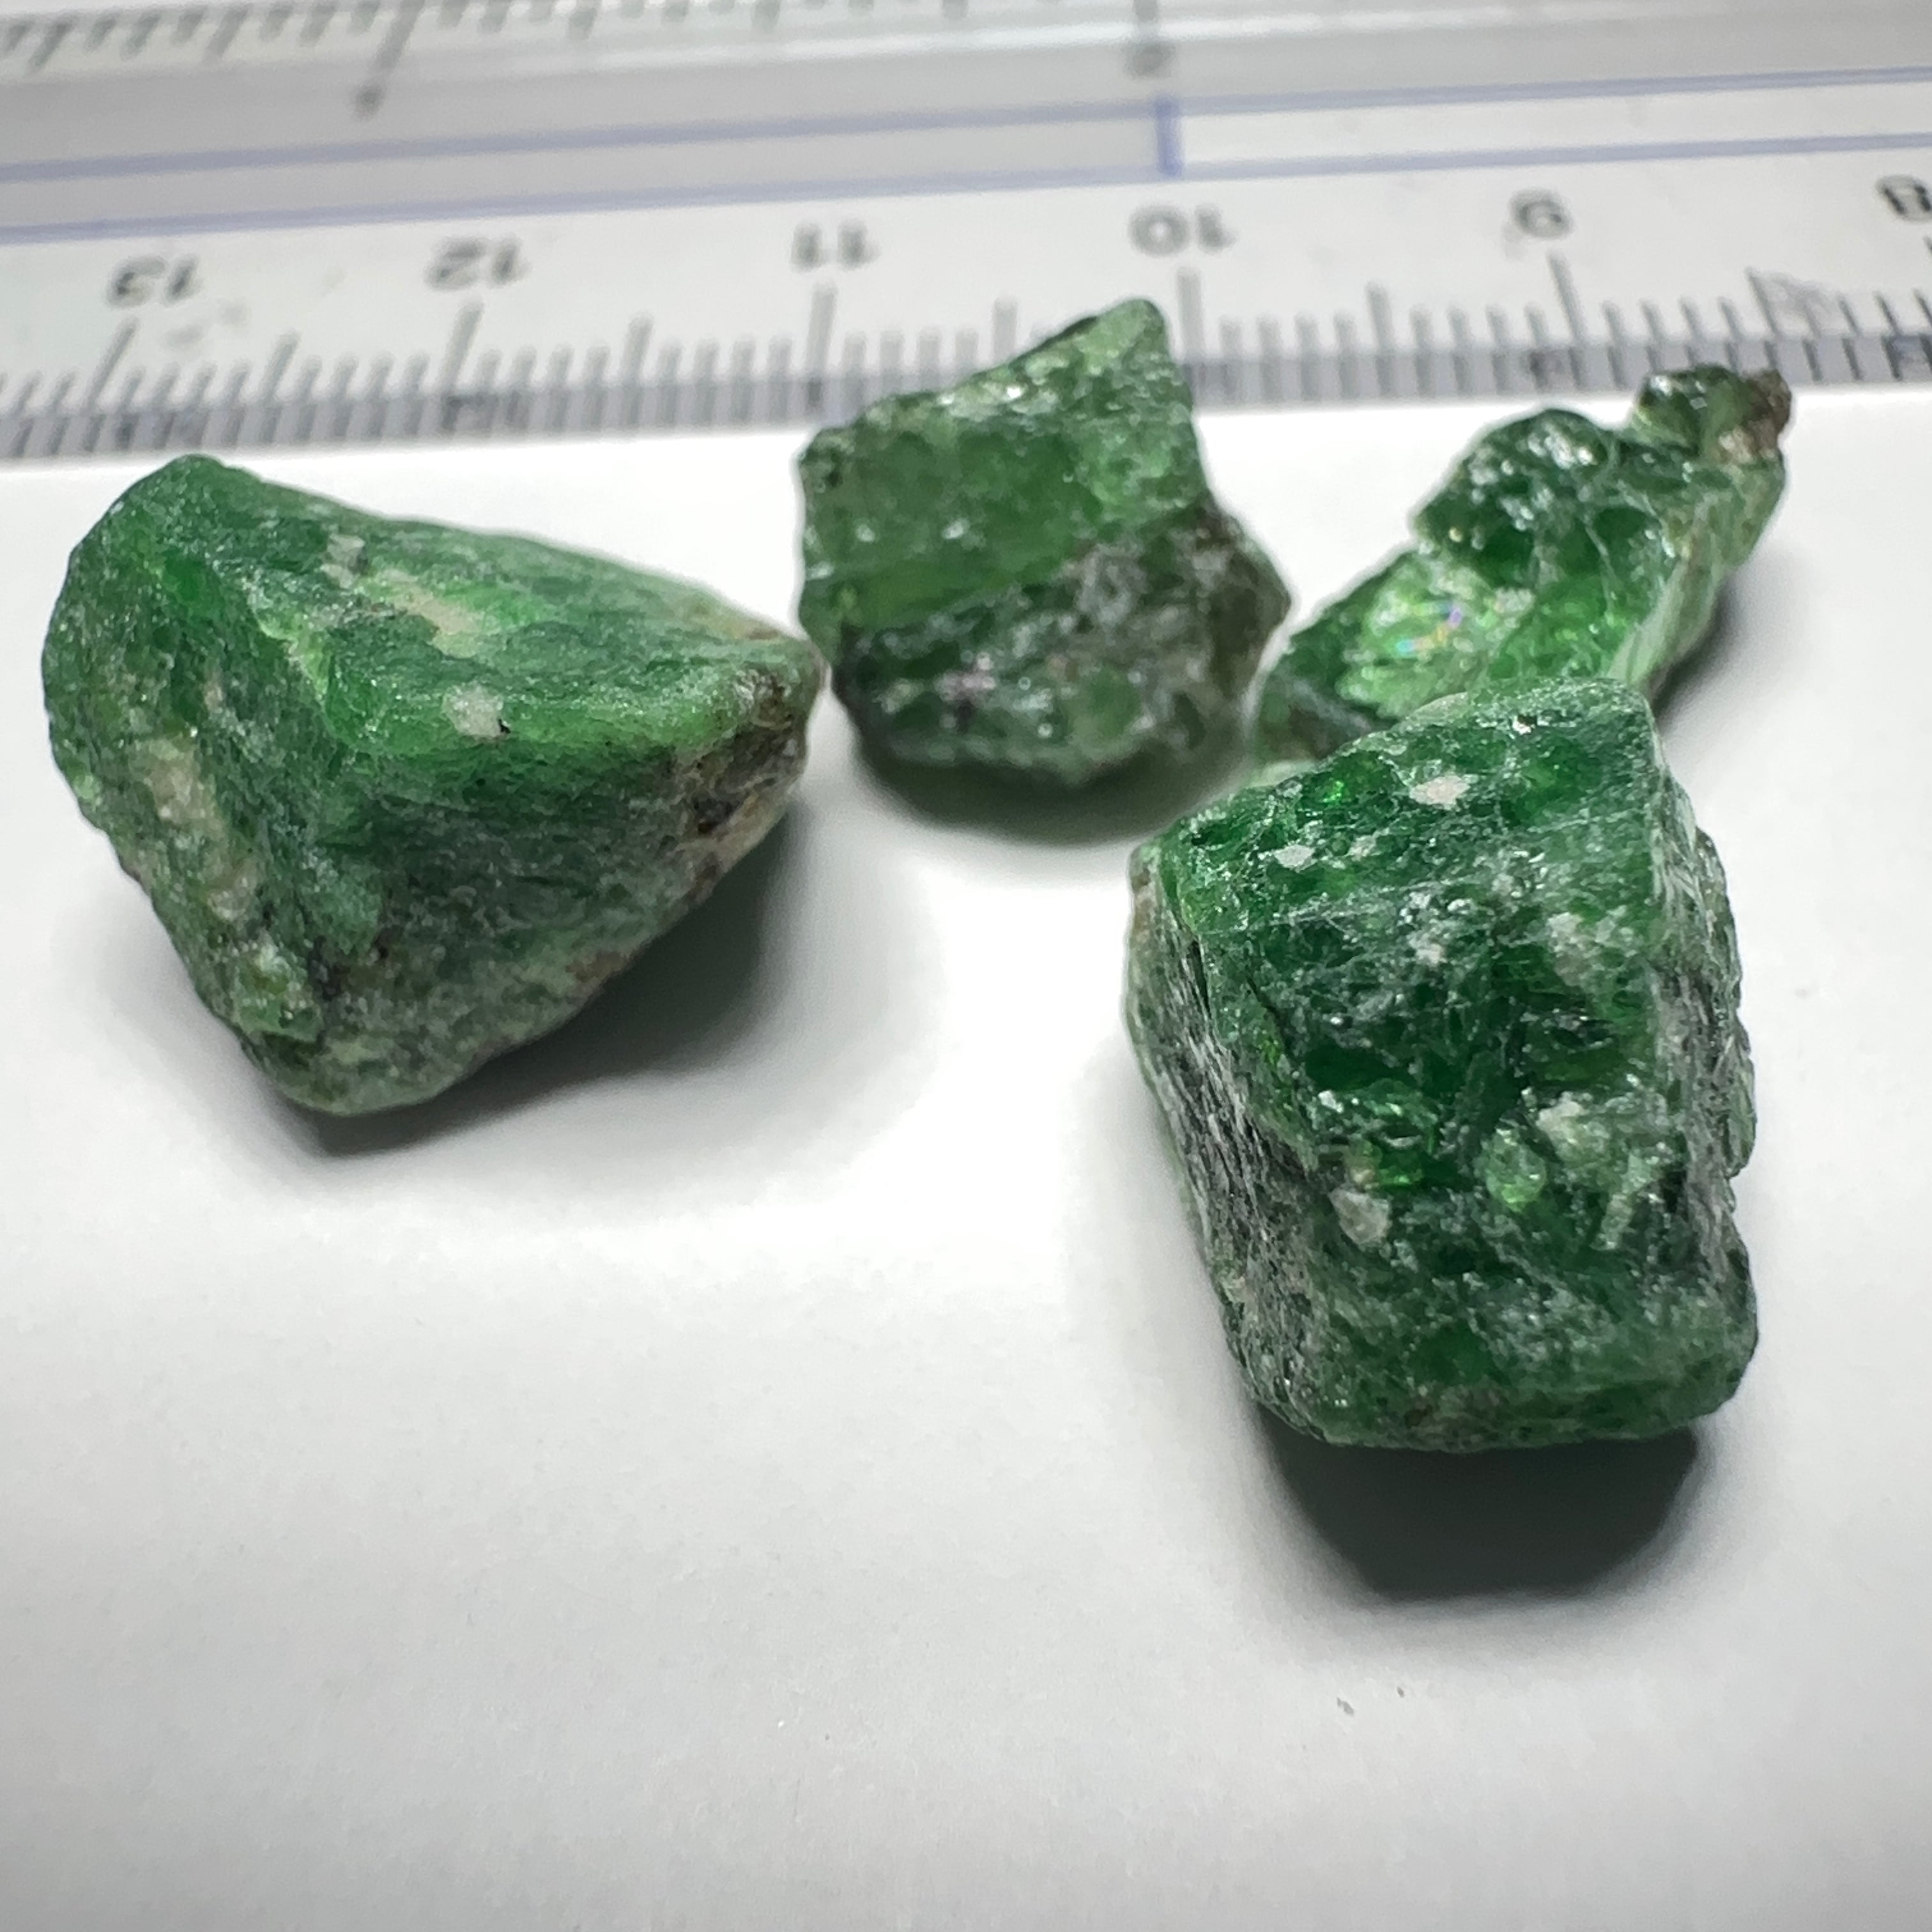 37.03ct Tsavorite Garnet Lot, Tanzania. Untreated Unheated. 4.82ct- 13.83ct. Good as specimens to add to a collection